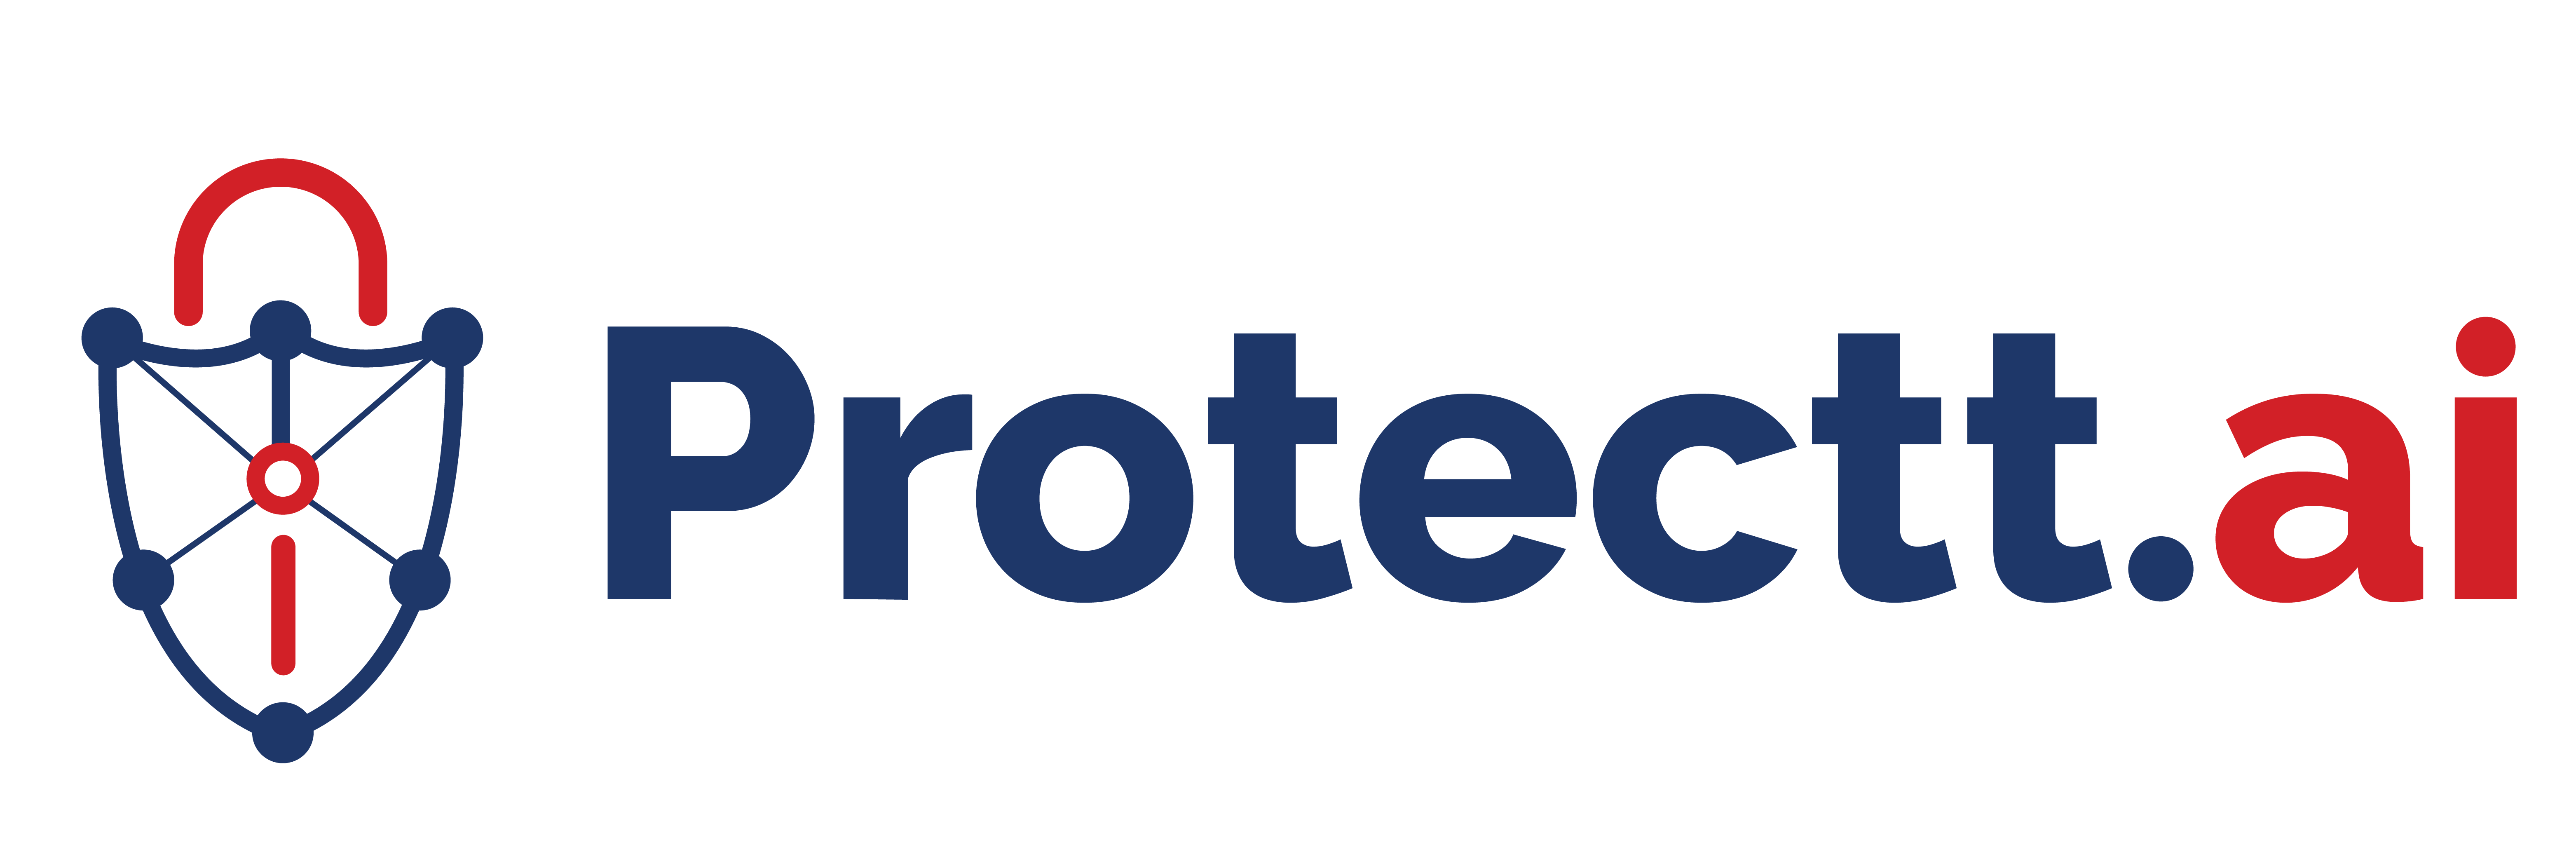 Protectt.ai Unveils New Version of AppProtectt - Mobile App RunTime Security Platform (XDR),  Extended Threat Detection & Response to Safeguard Sensitive Mobile Apps